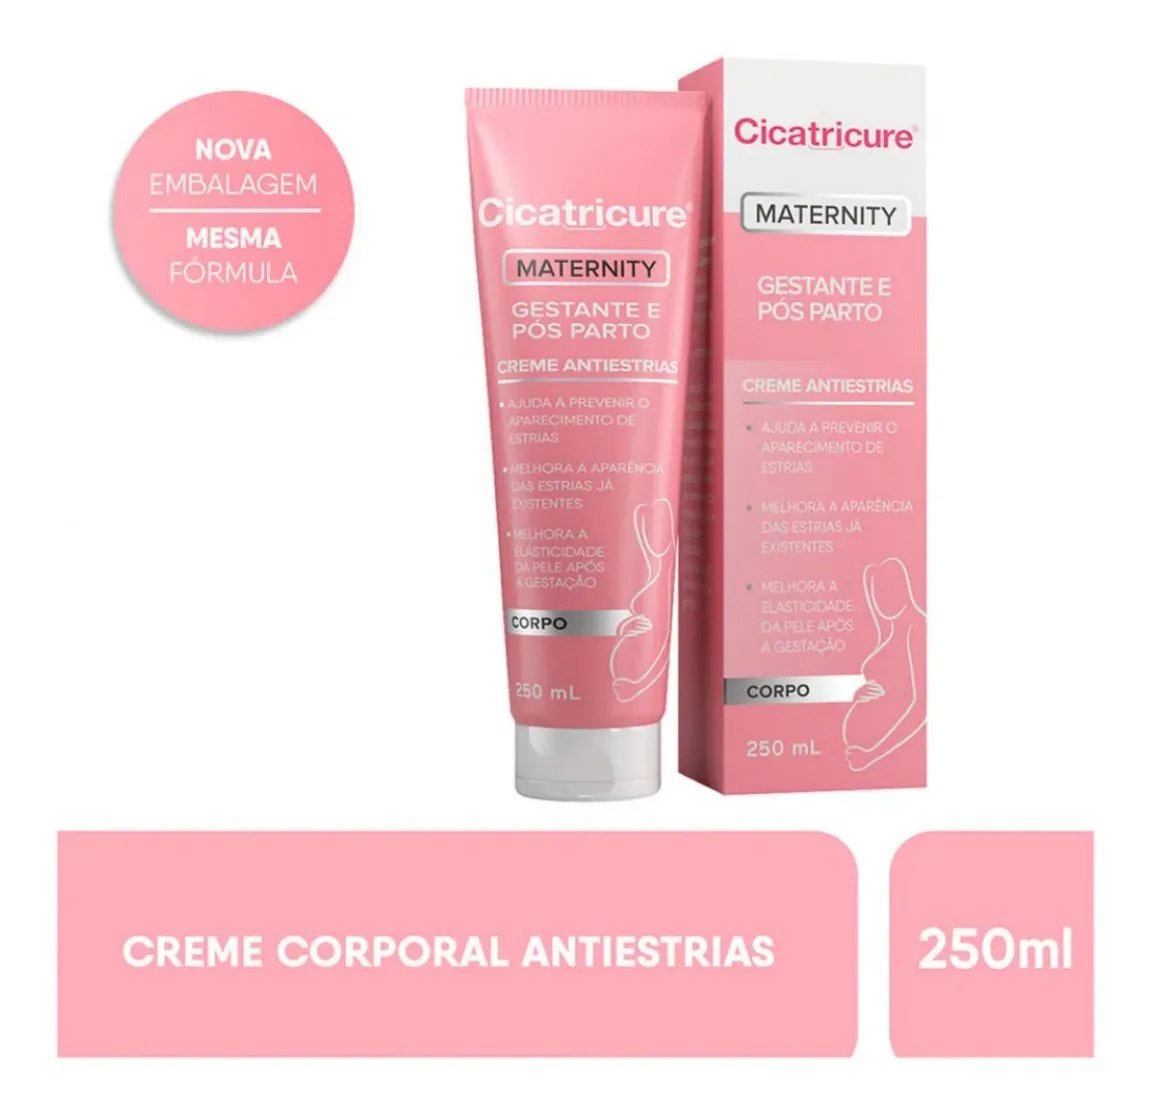 Cicatricure Skin Care Cicatricure Maternity Cicatricure Pregnant Antiestries 250ml Mother C / Note